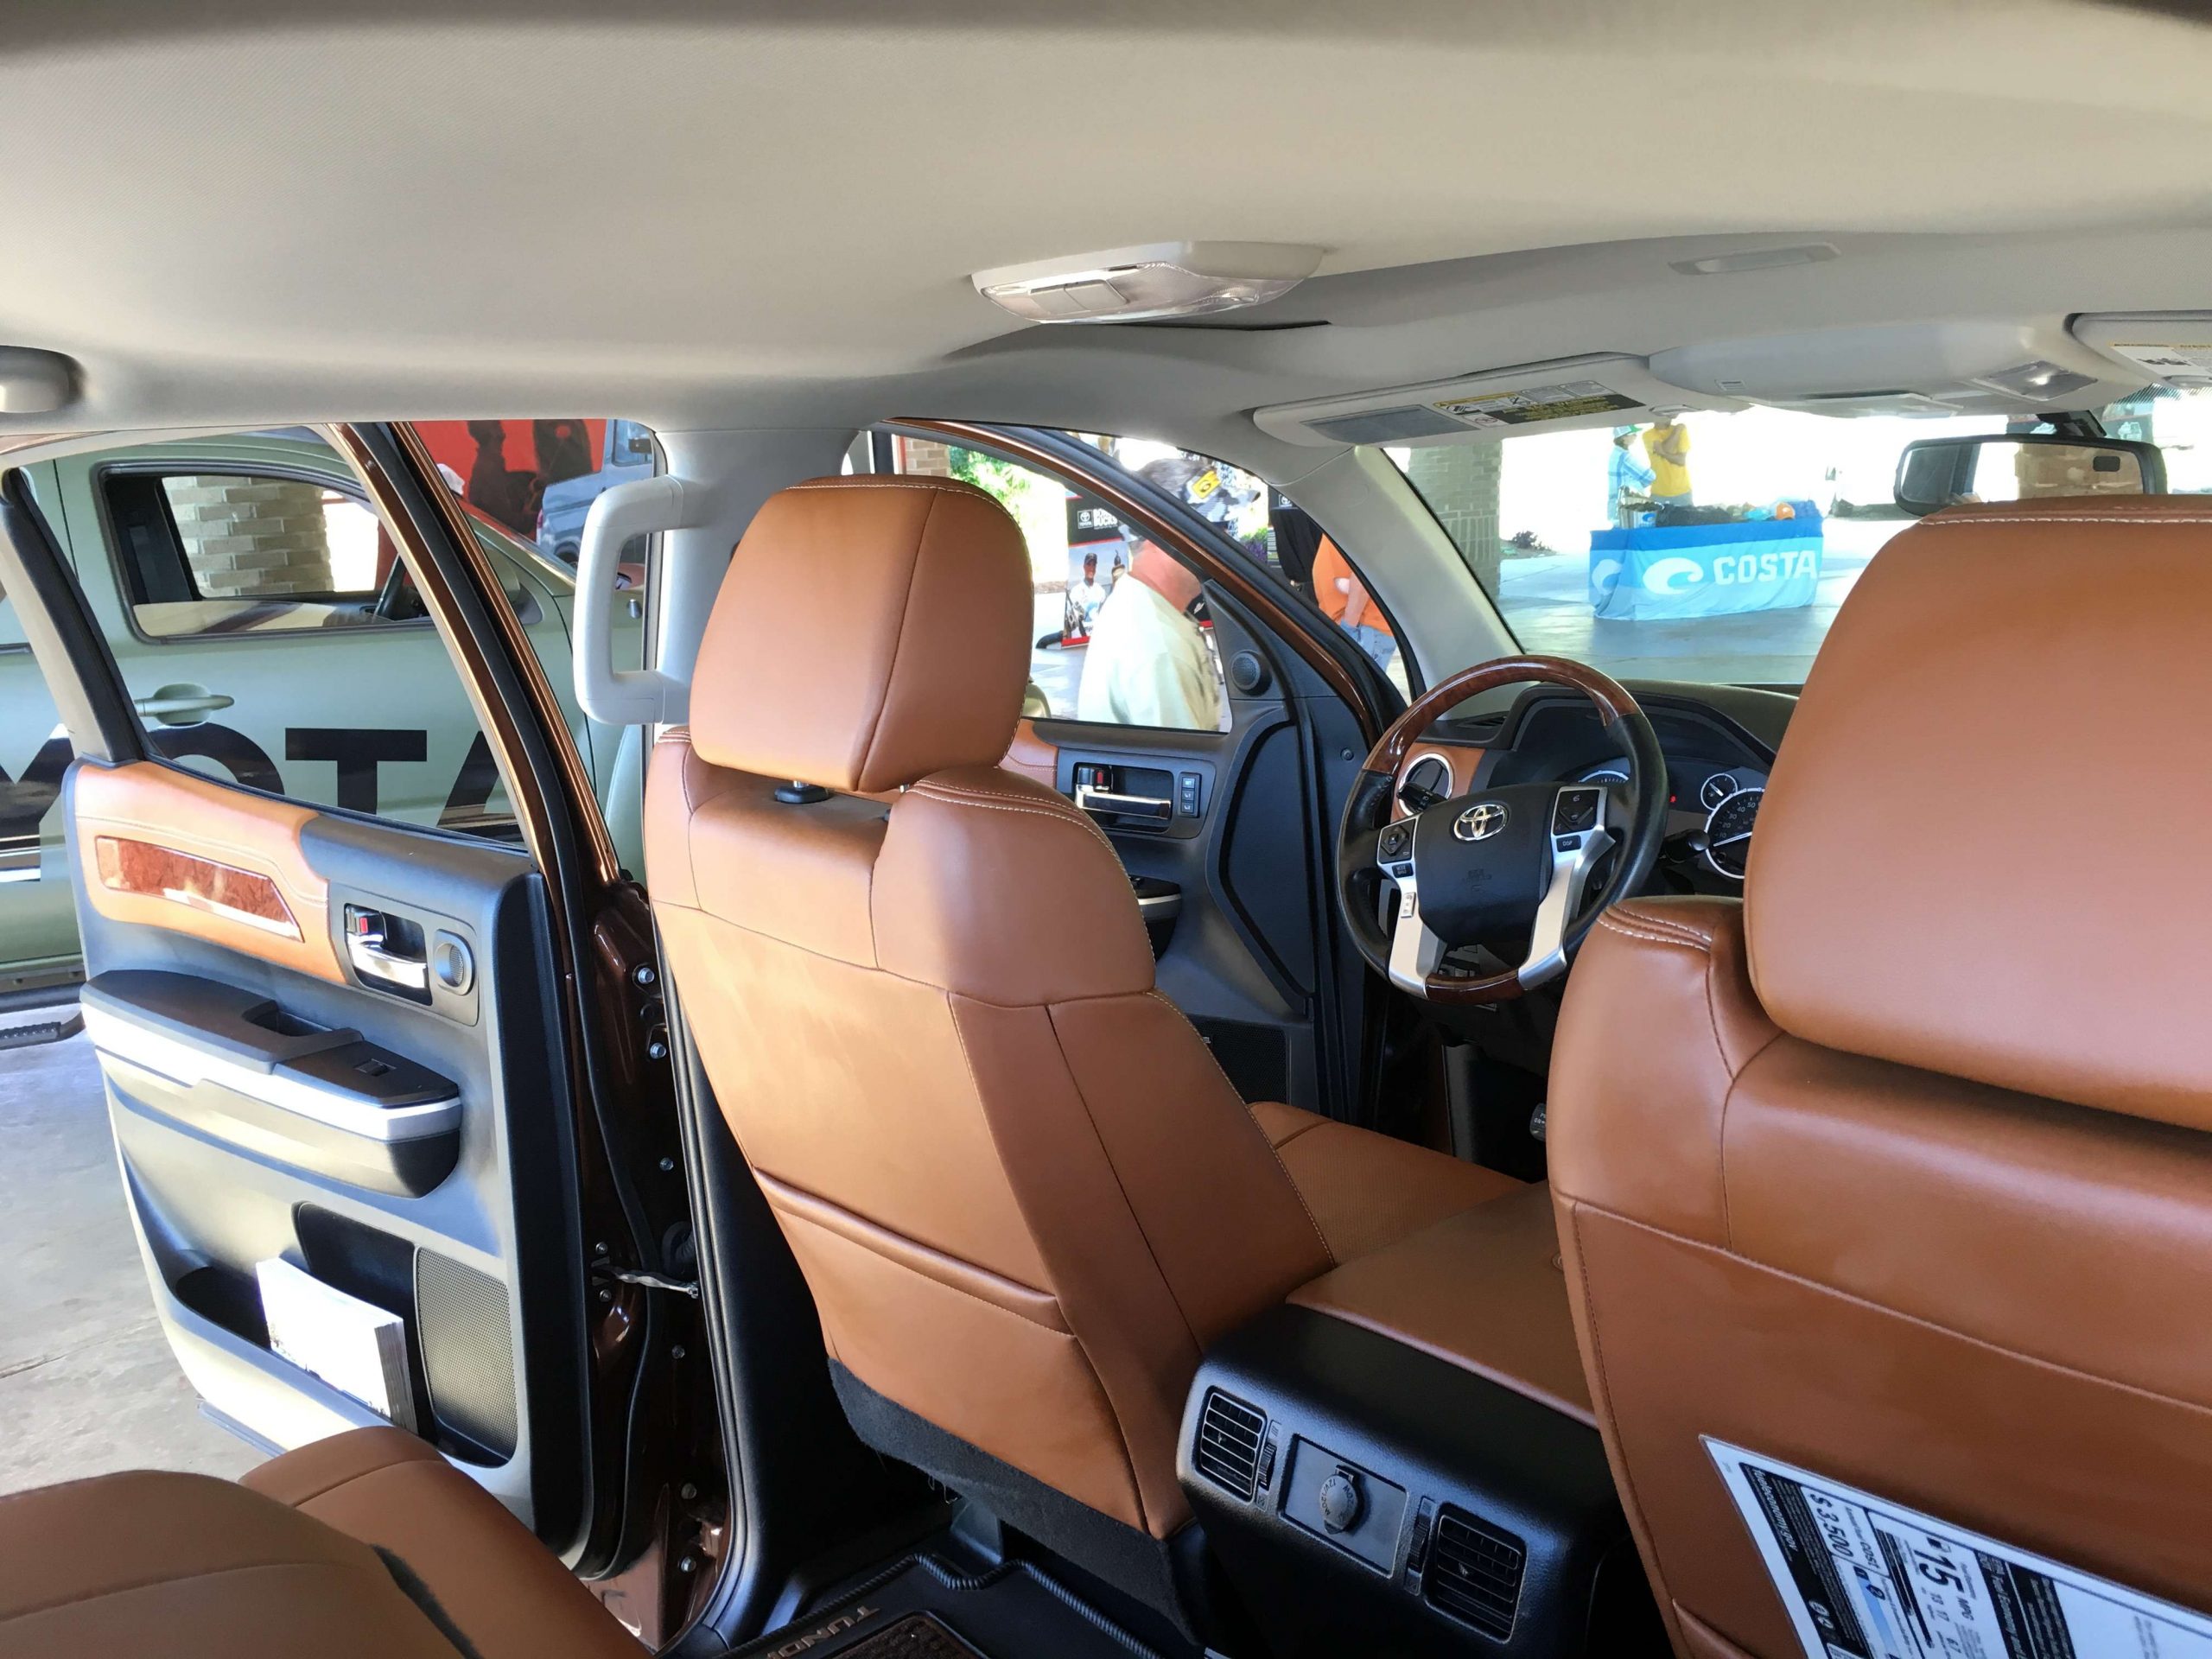 Thereâs as much room in the backseat as there is up front. The color of this interior is smashing.